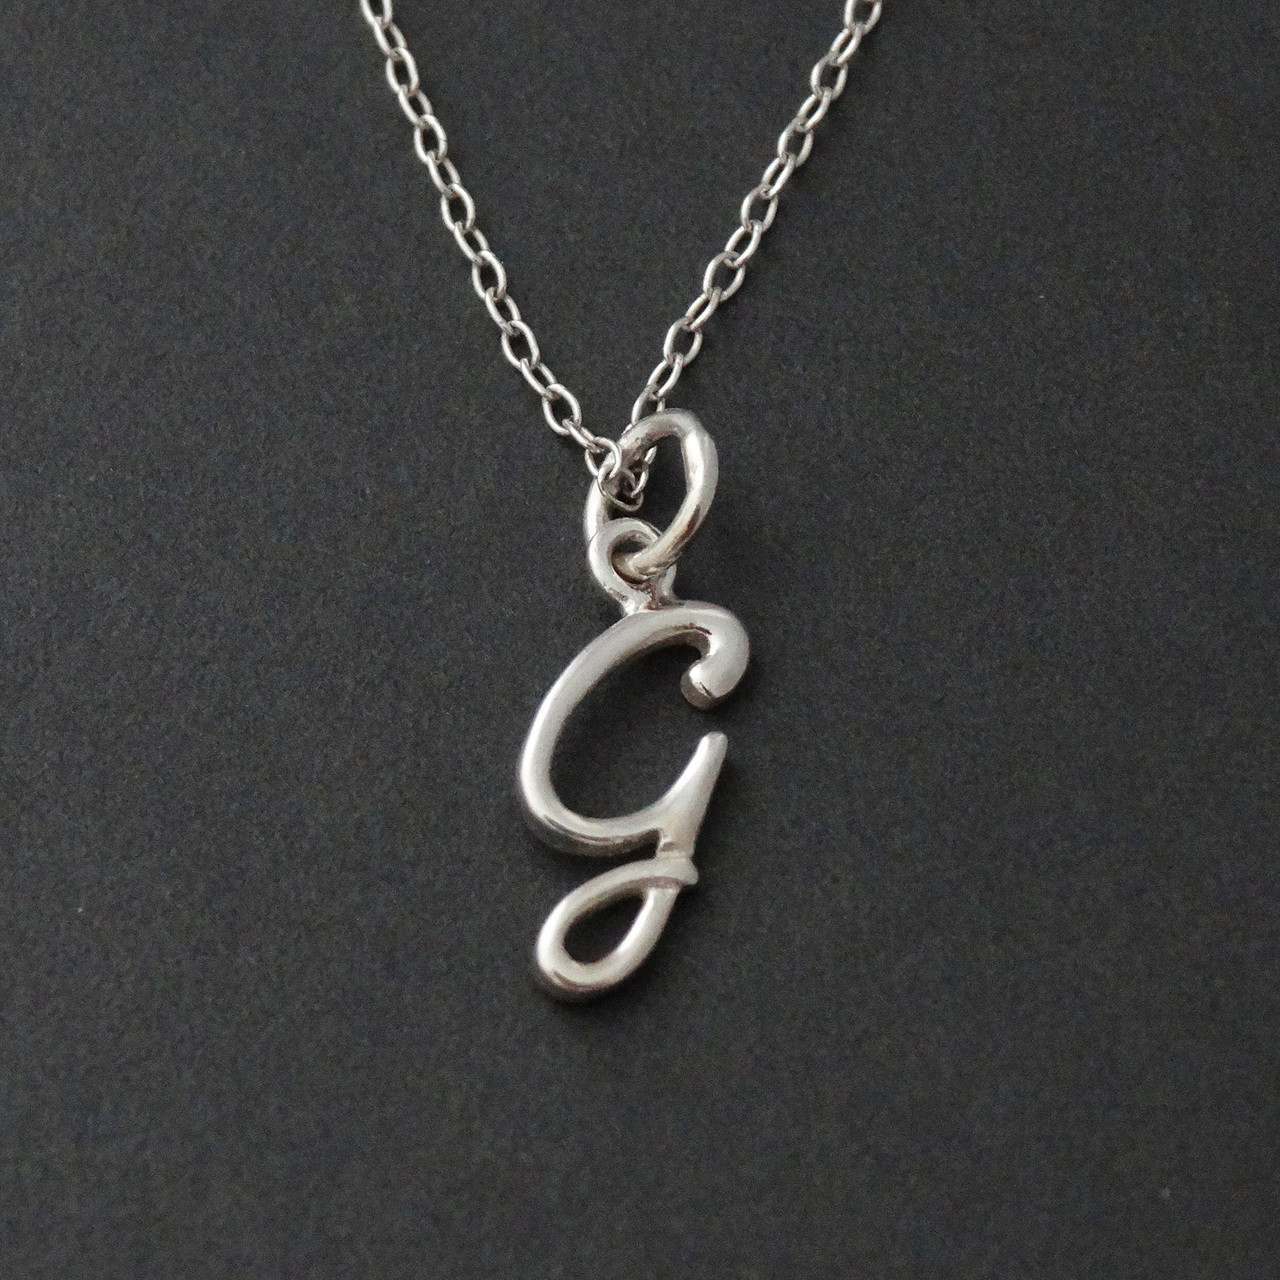 Small open circle pendant necklace N°10 – AgJc